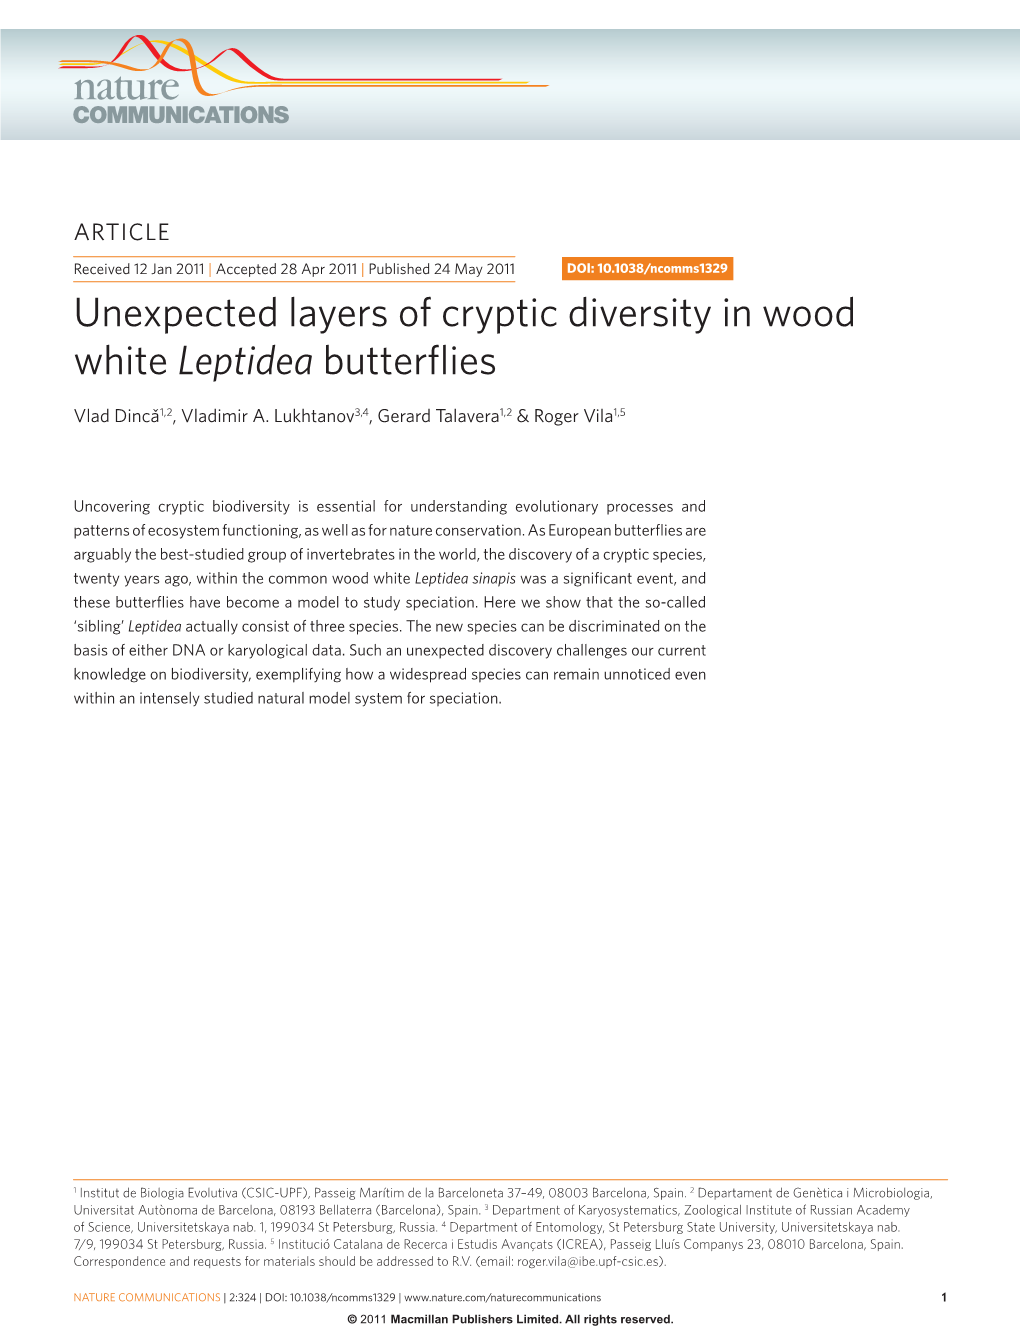 Unexpected Layers of Cryptic Diversity in Wood White Leptidea Butterflies